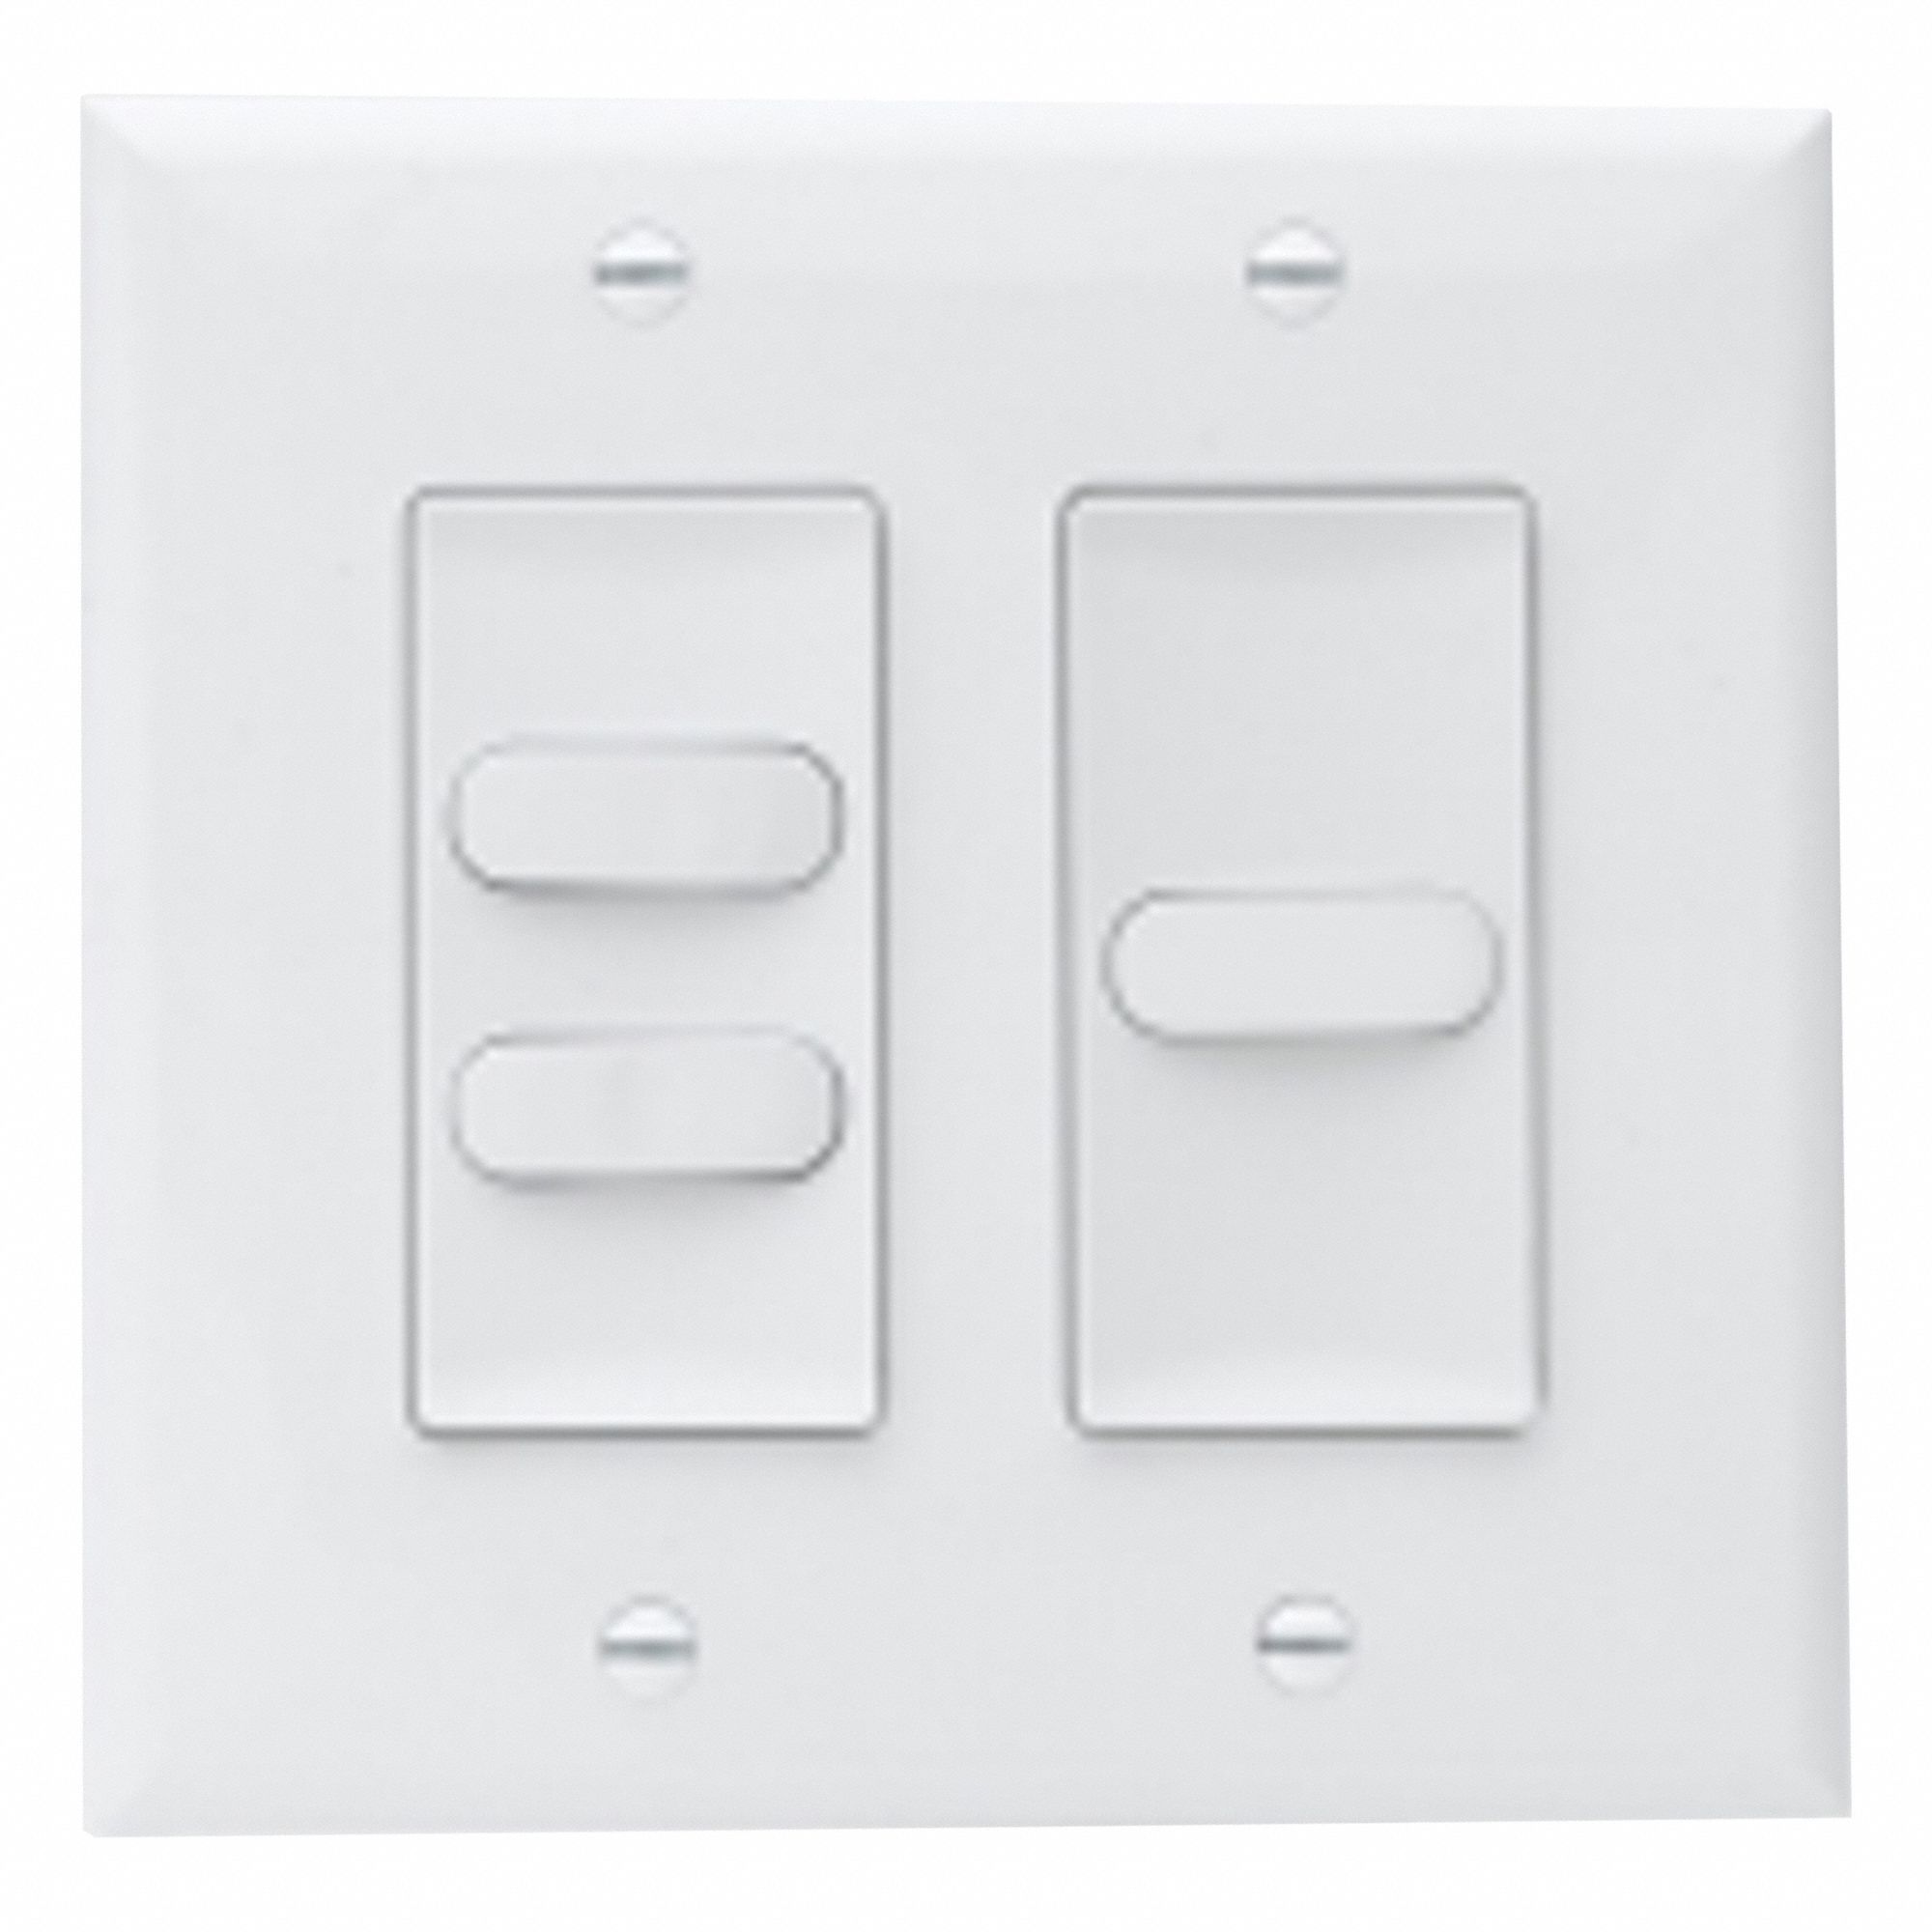 PROGRAMMABLE 2 BUTTON SWITCH, LOW VOLTAGE, WHITE